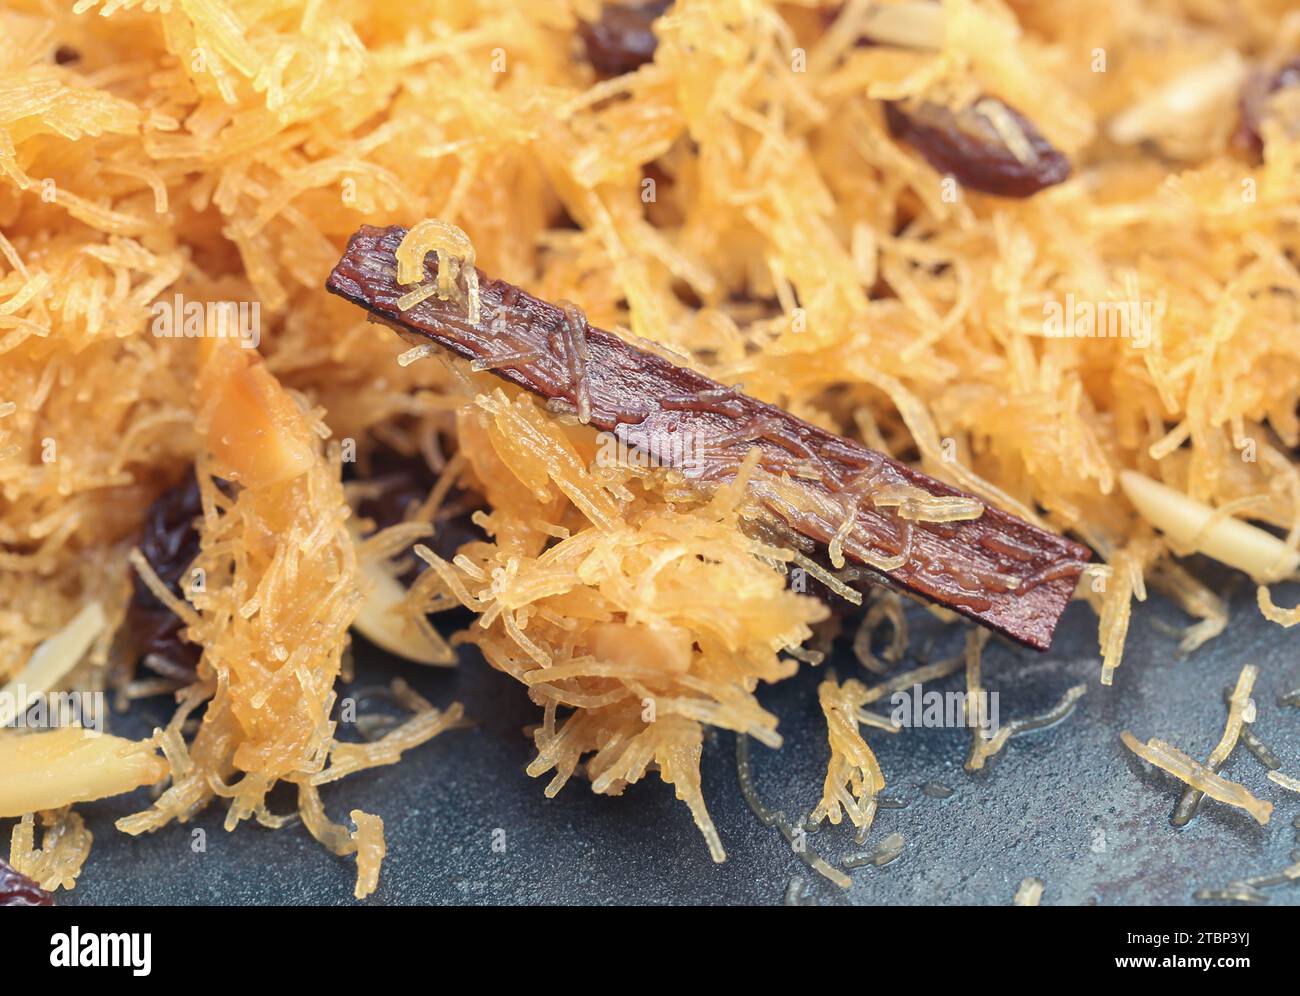 Freshly cooked delicious vermicelli ready to consume Stock Photo